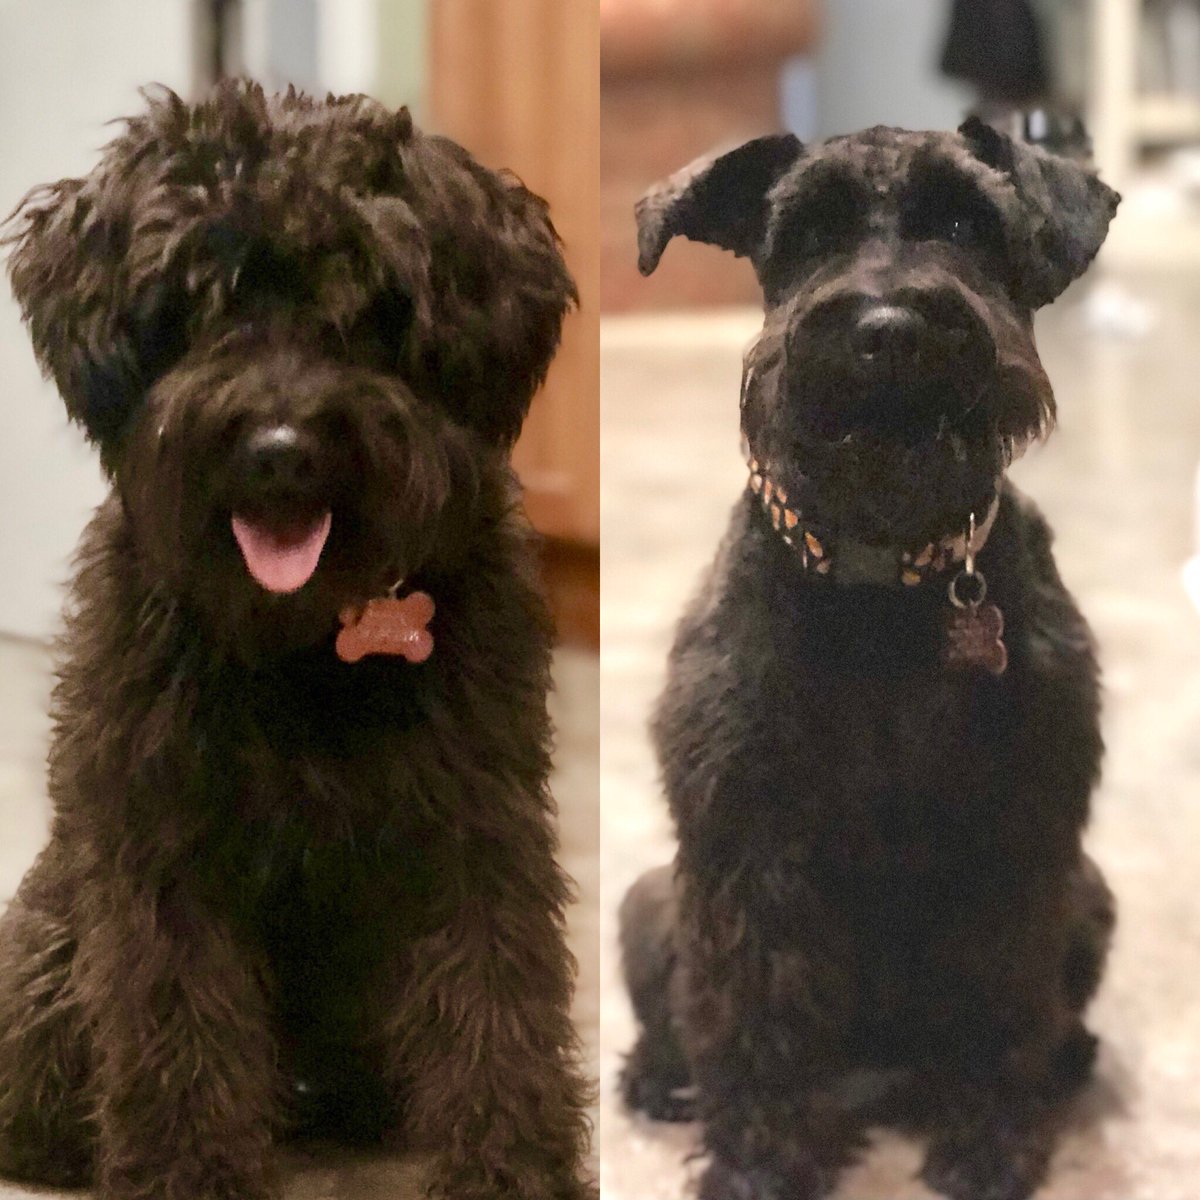 On a rather stressful day with life changing decisions to be made we thought we would bring a little levity 😁 So please vote with a comment below - puppy cut or big girl haircut? Now go VOTE FOR REAL BECAUSE THIS IS NO JOKE. Thank you ♥️#vote #ElectionDay2018 #GoVote